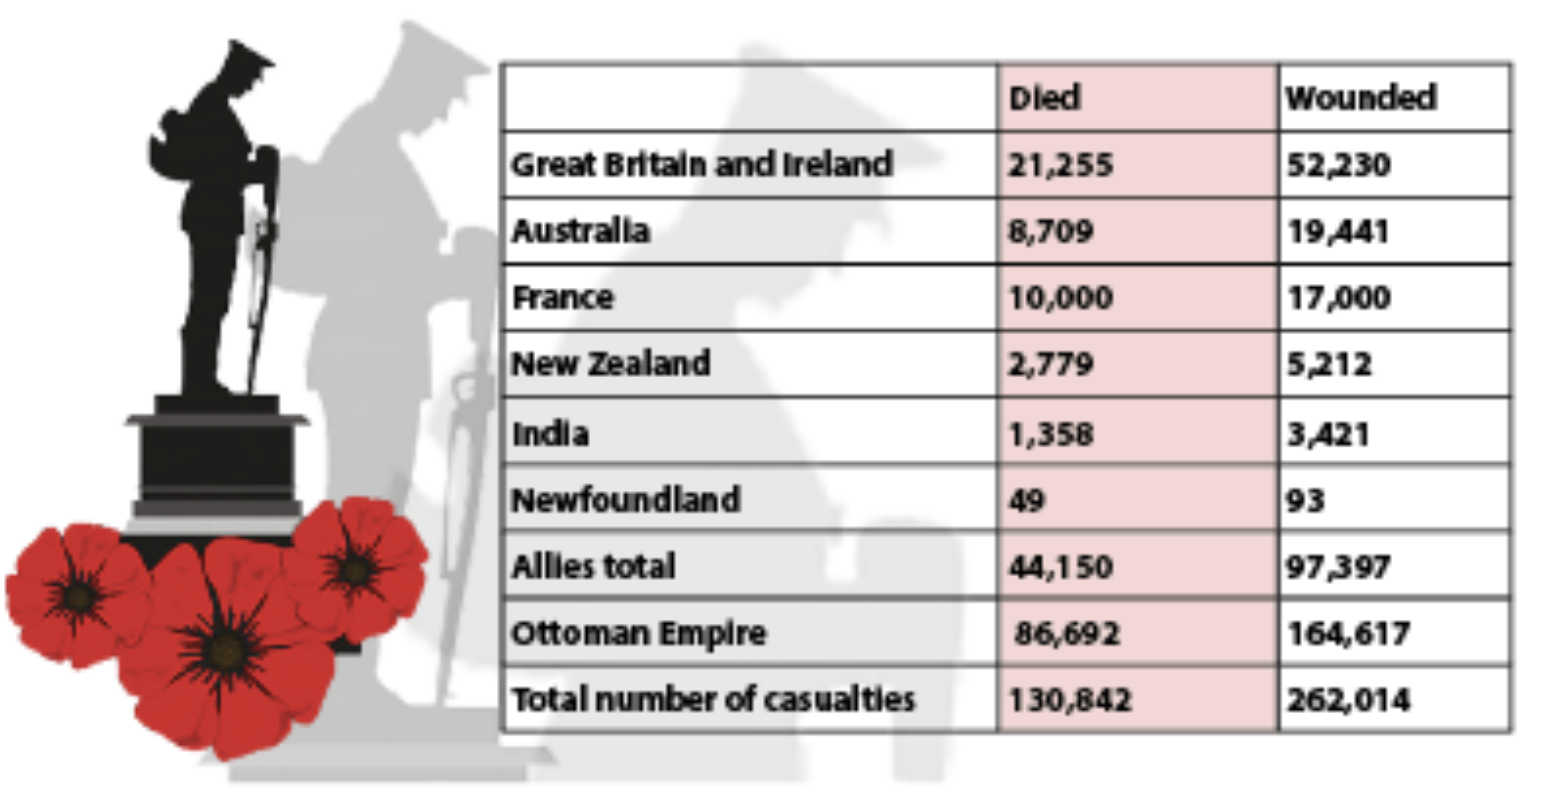 Casualties by country during the Gallipoli campaign (April 1915-January 1916)